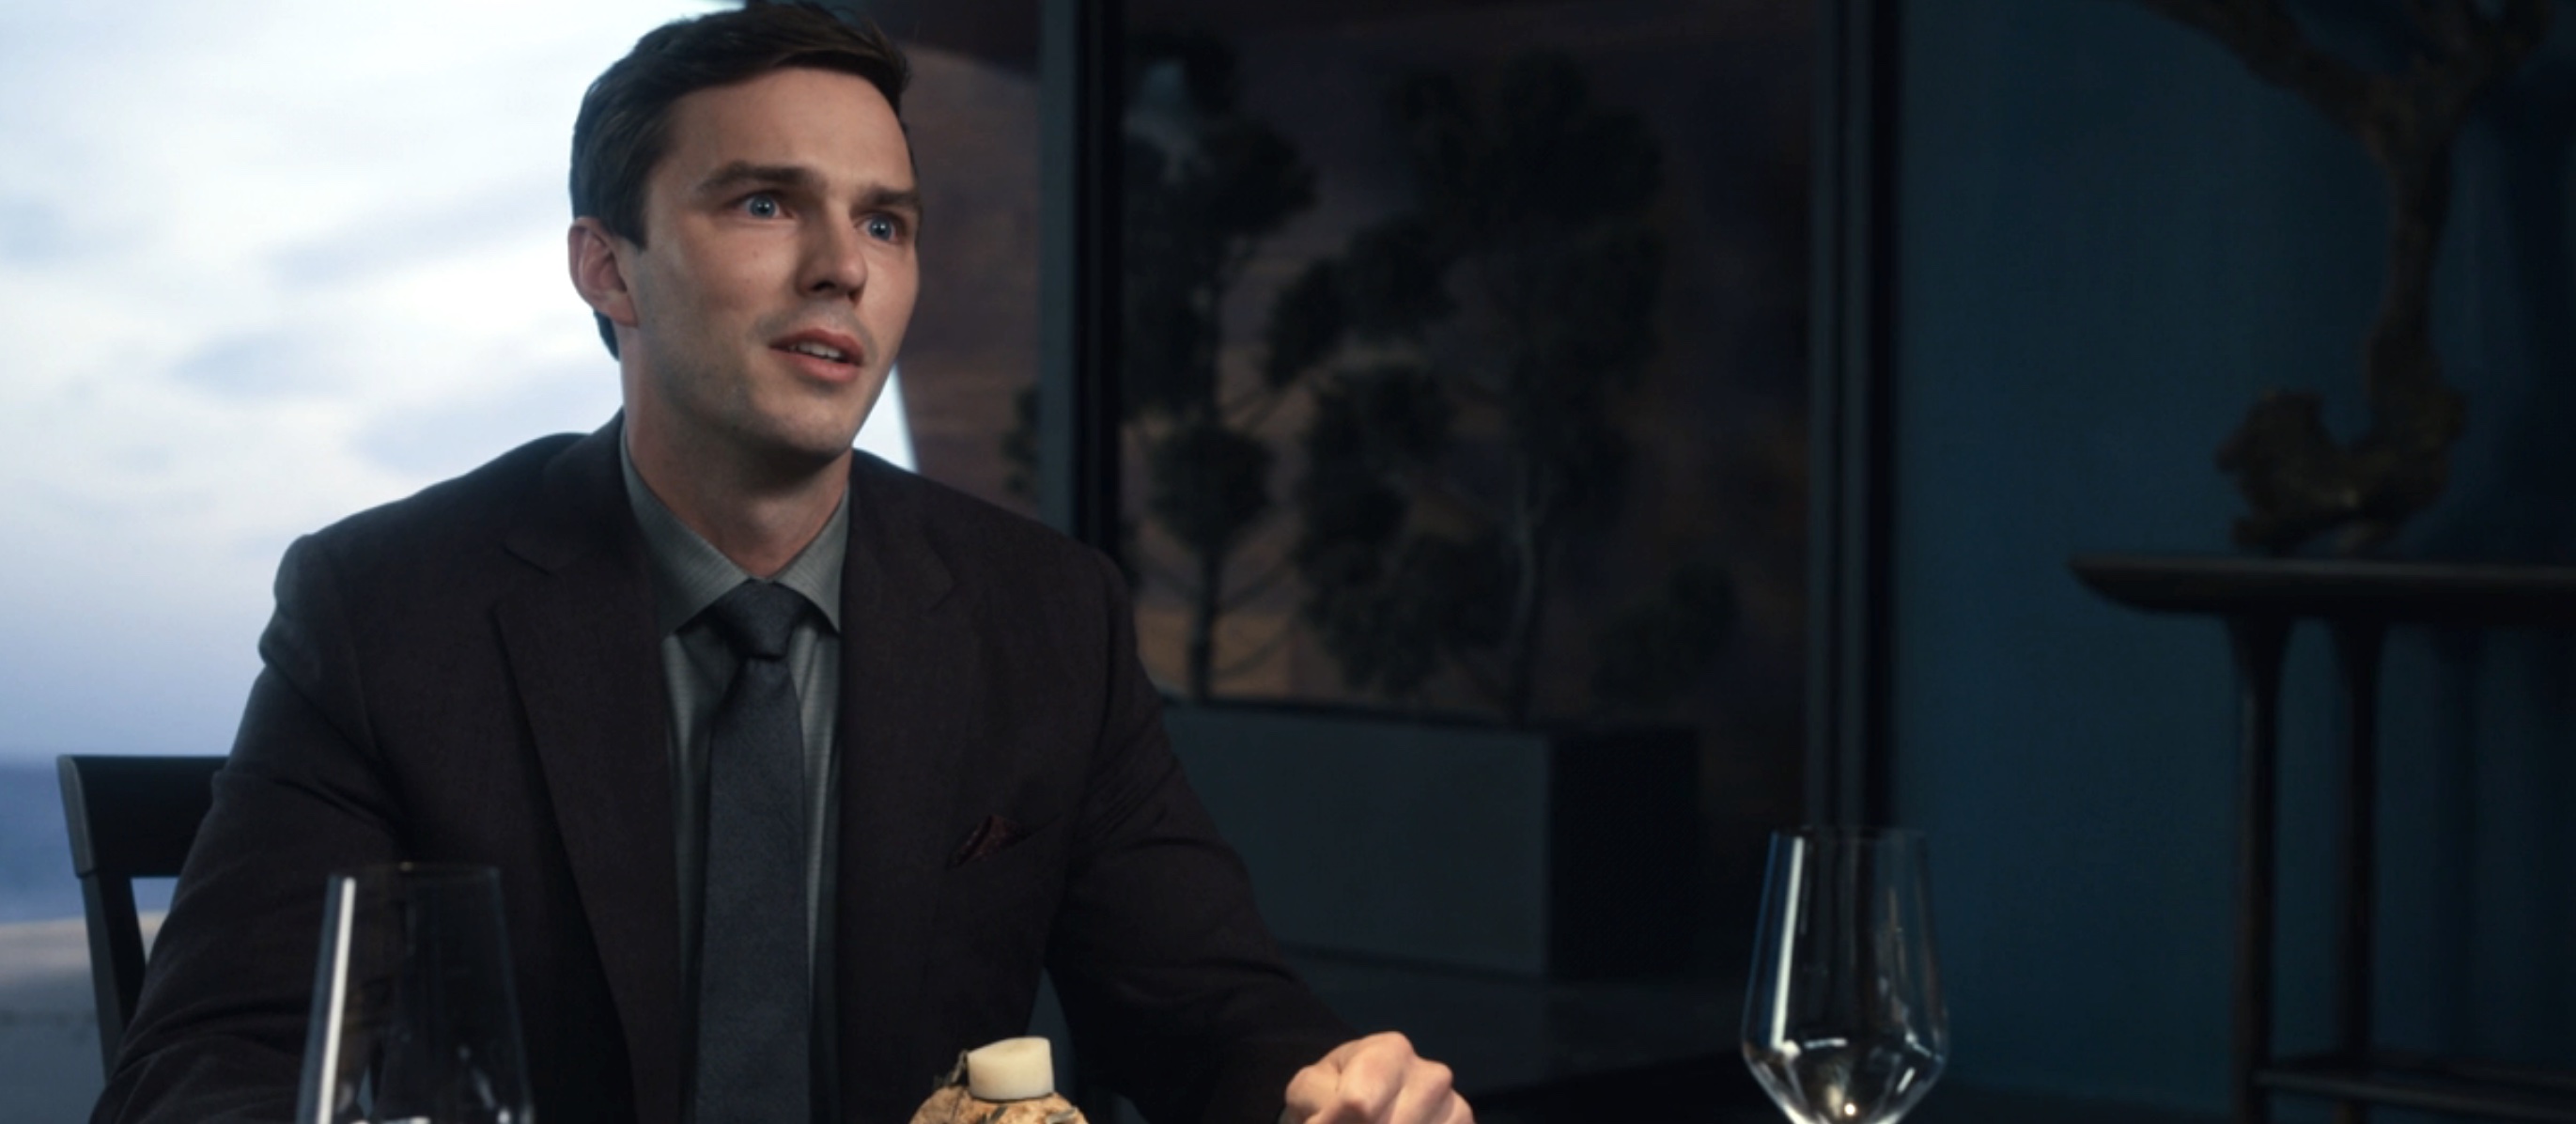 Nicholas Hoult’s Tyler, dressed in a suit and tie, tears up as a chef off screen describes his meal in The Menu